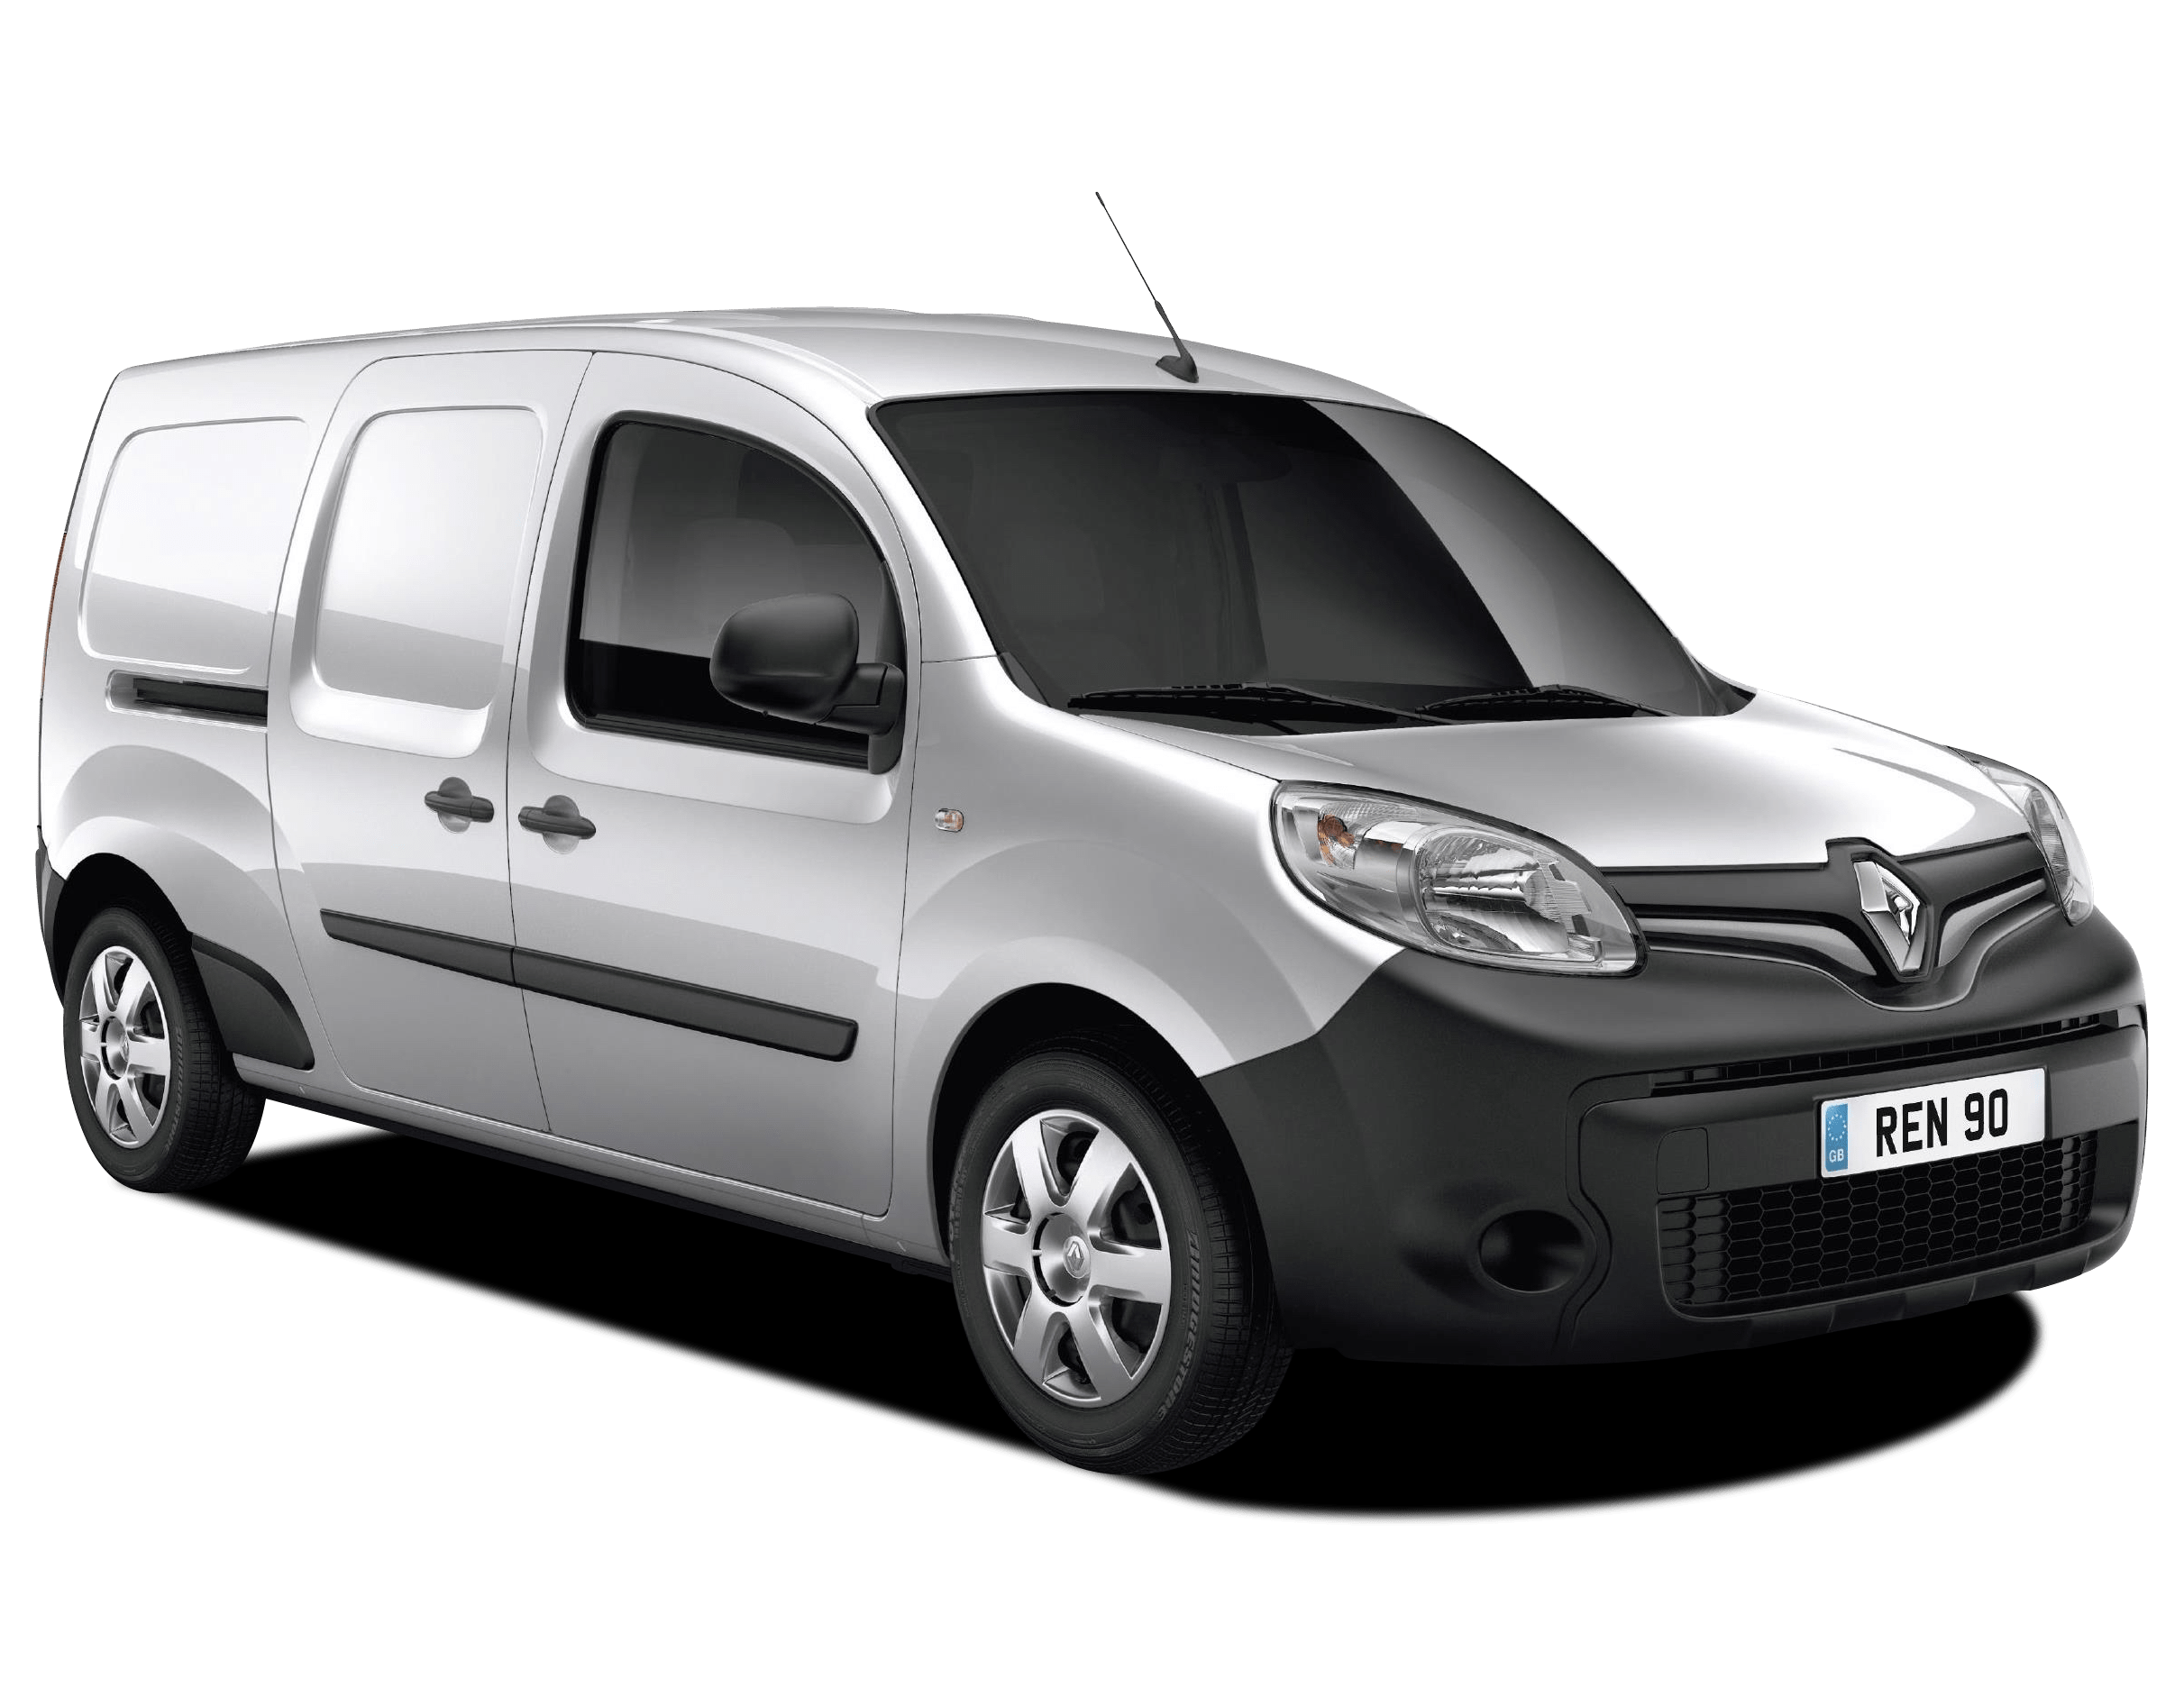 Renault Kangoo Review, For Sale, Colours, Price, Models \u0026 Specs | CarsGuide